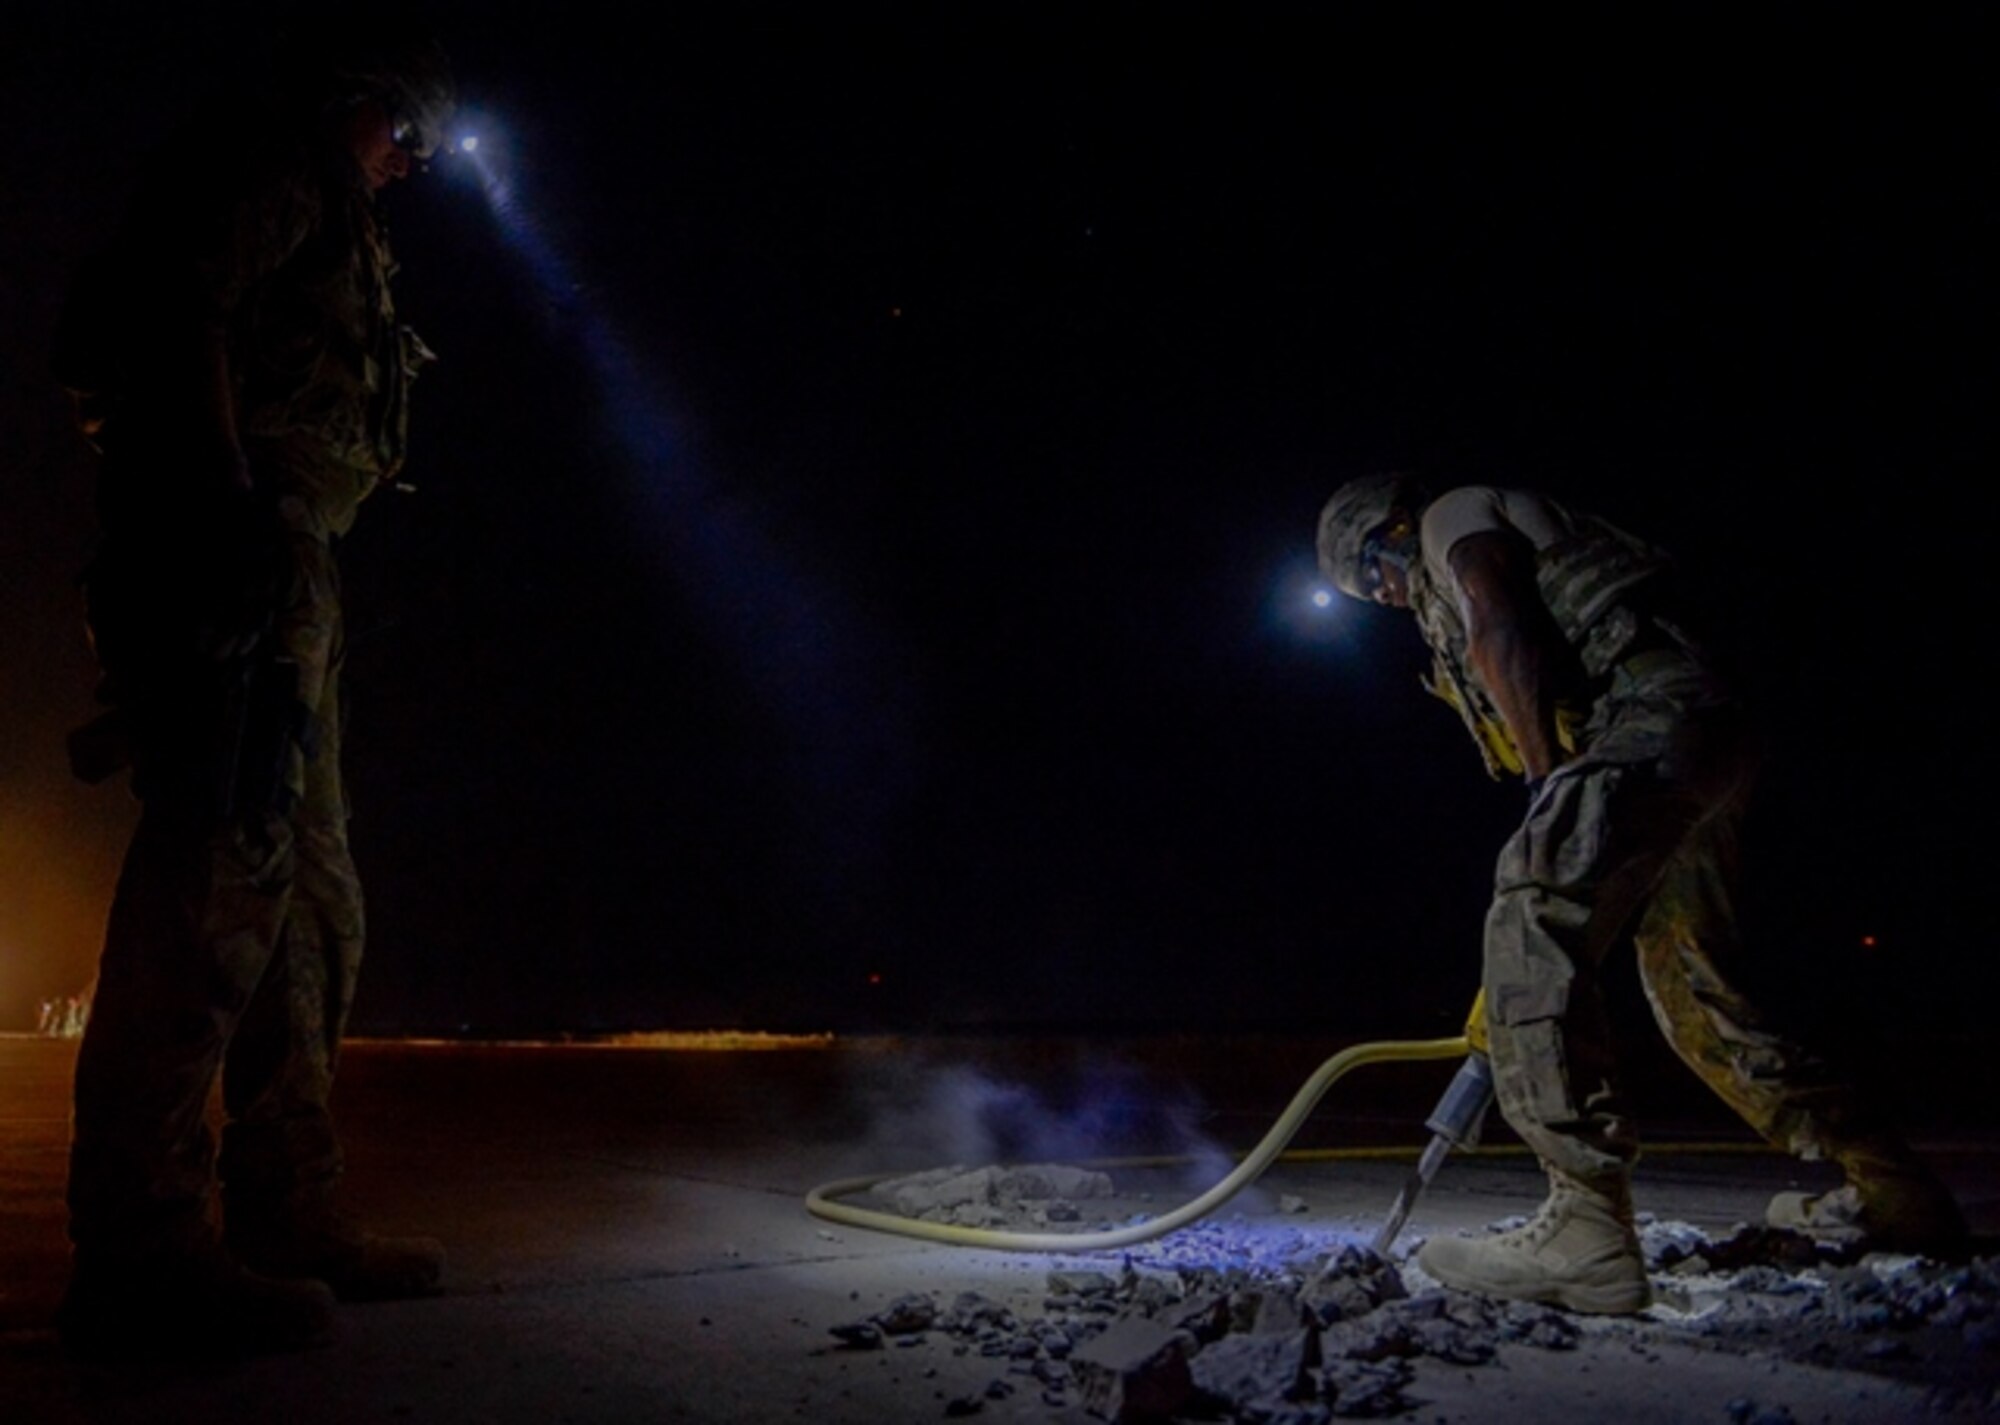 Two members of the 1st Expeditionary Civil Engineer Group repair the flightline at Qayyarah West Airfield during a restoration project May 16, 2017. Qayyarah West is an airfield in northern Iraq’s Ninawa Province and serves as the logistical hub and strategic launching pad resupplying the frontlines in an attempt to recapture Mosul. (U.S. Air Force photo by Staff Sgt. Michael Battles)